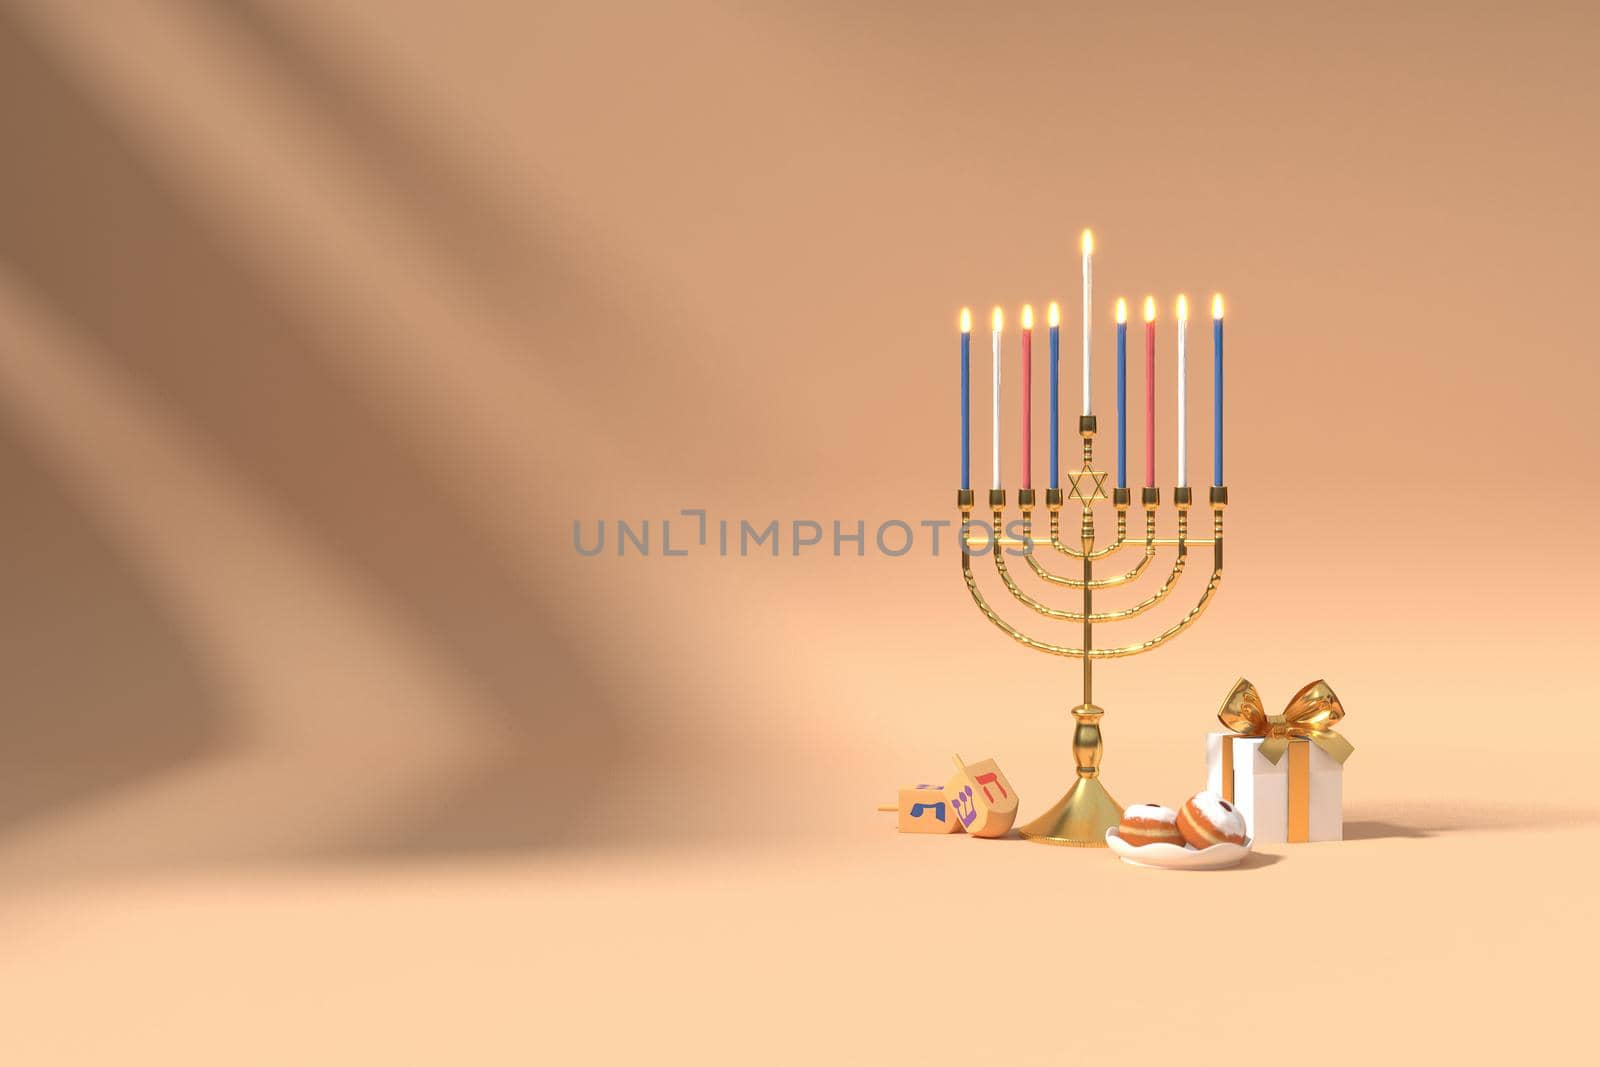 3d rendering Image of Jewish holiday Hanukkah with menorah or traditional Candelabra,gif box and wooden dreidels or spinning top on a  brown background.